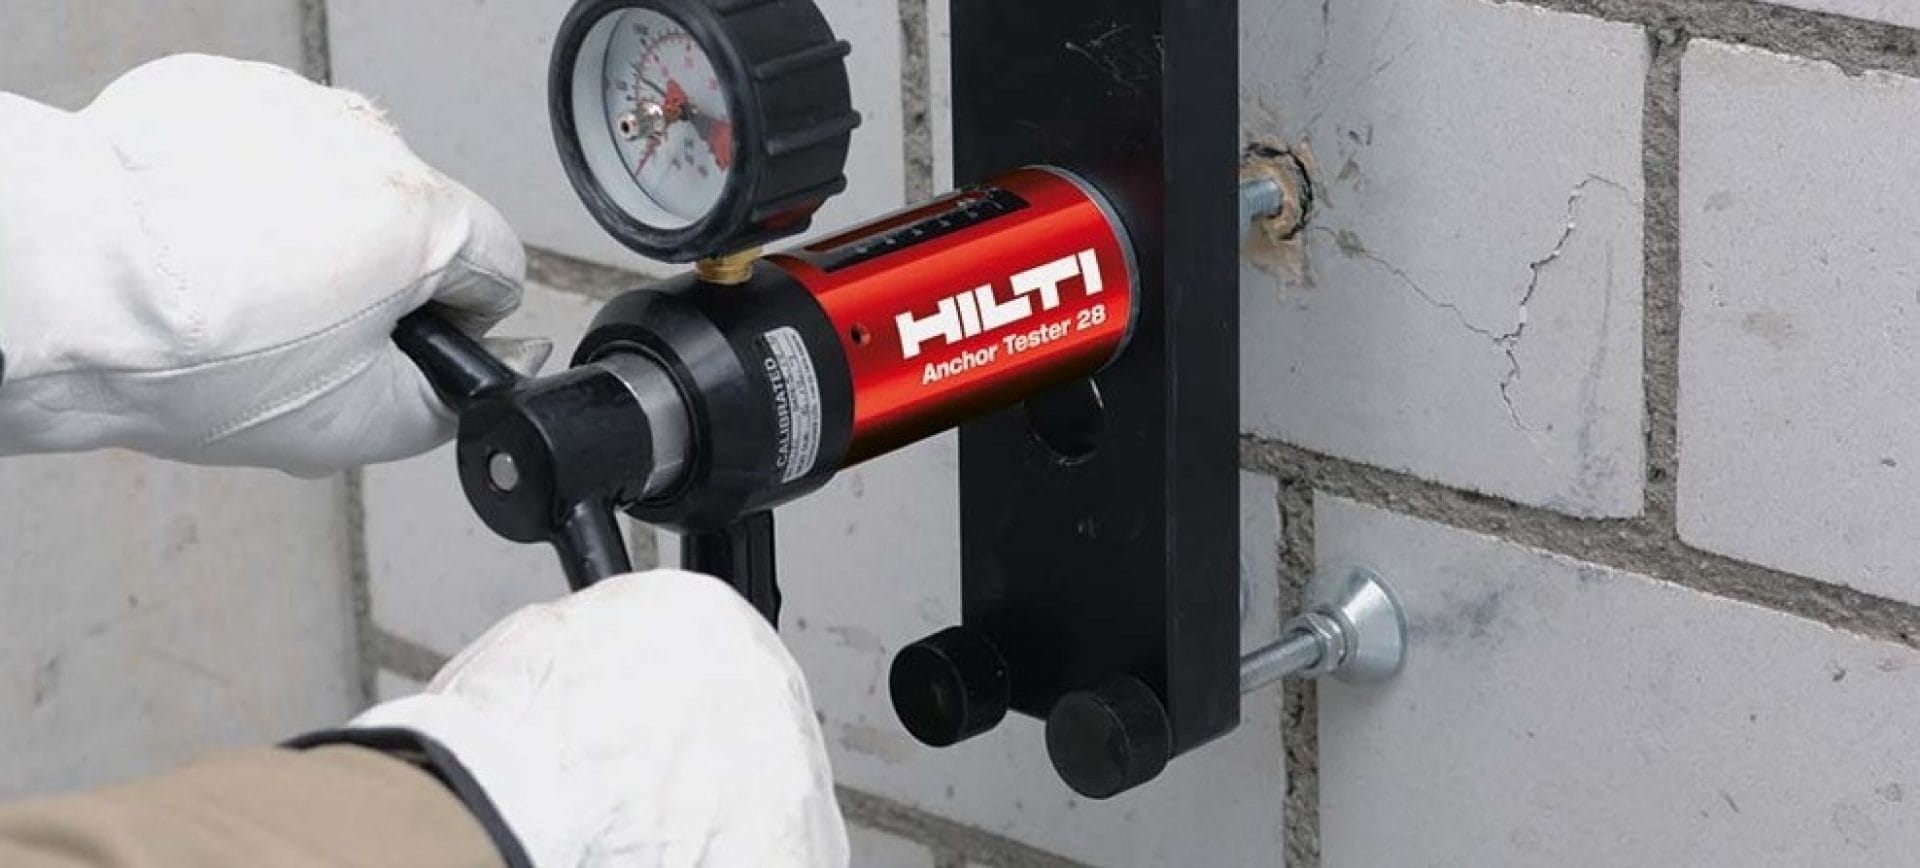 Hilti onsite testing HIT-HY 270 anchor tester